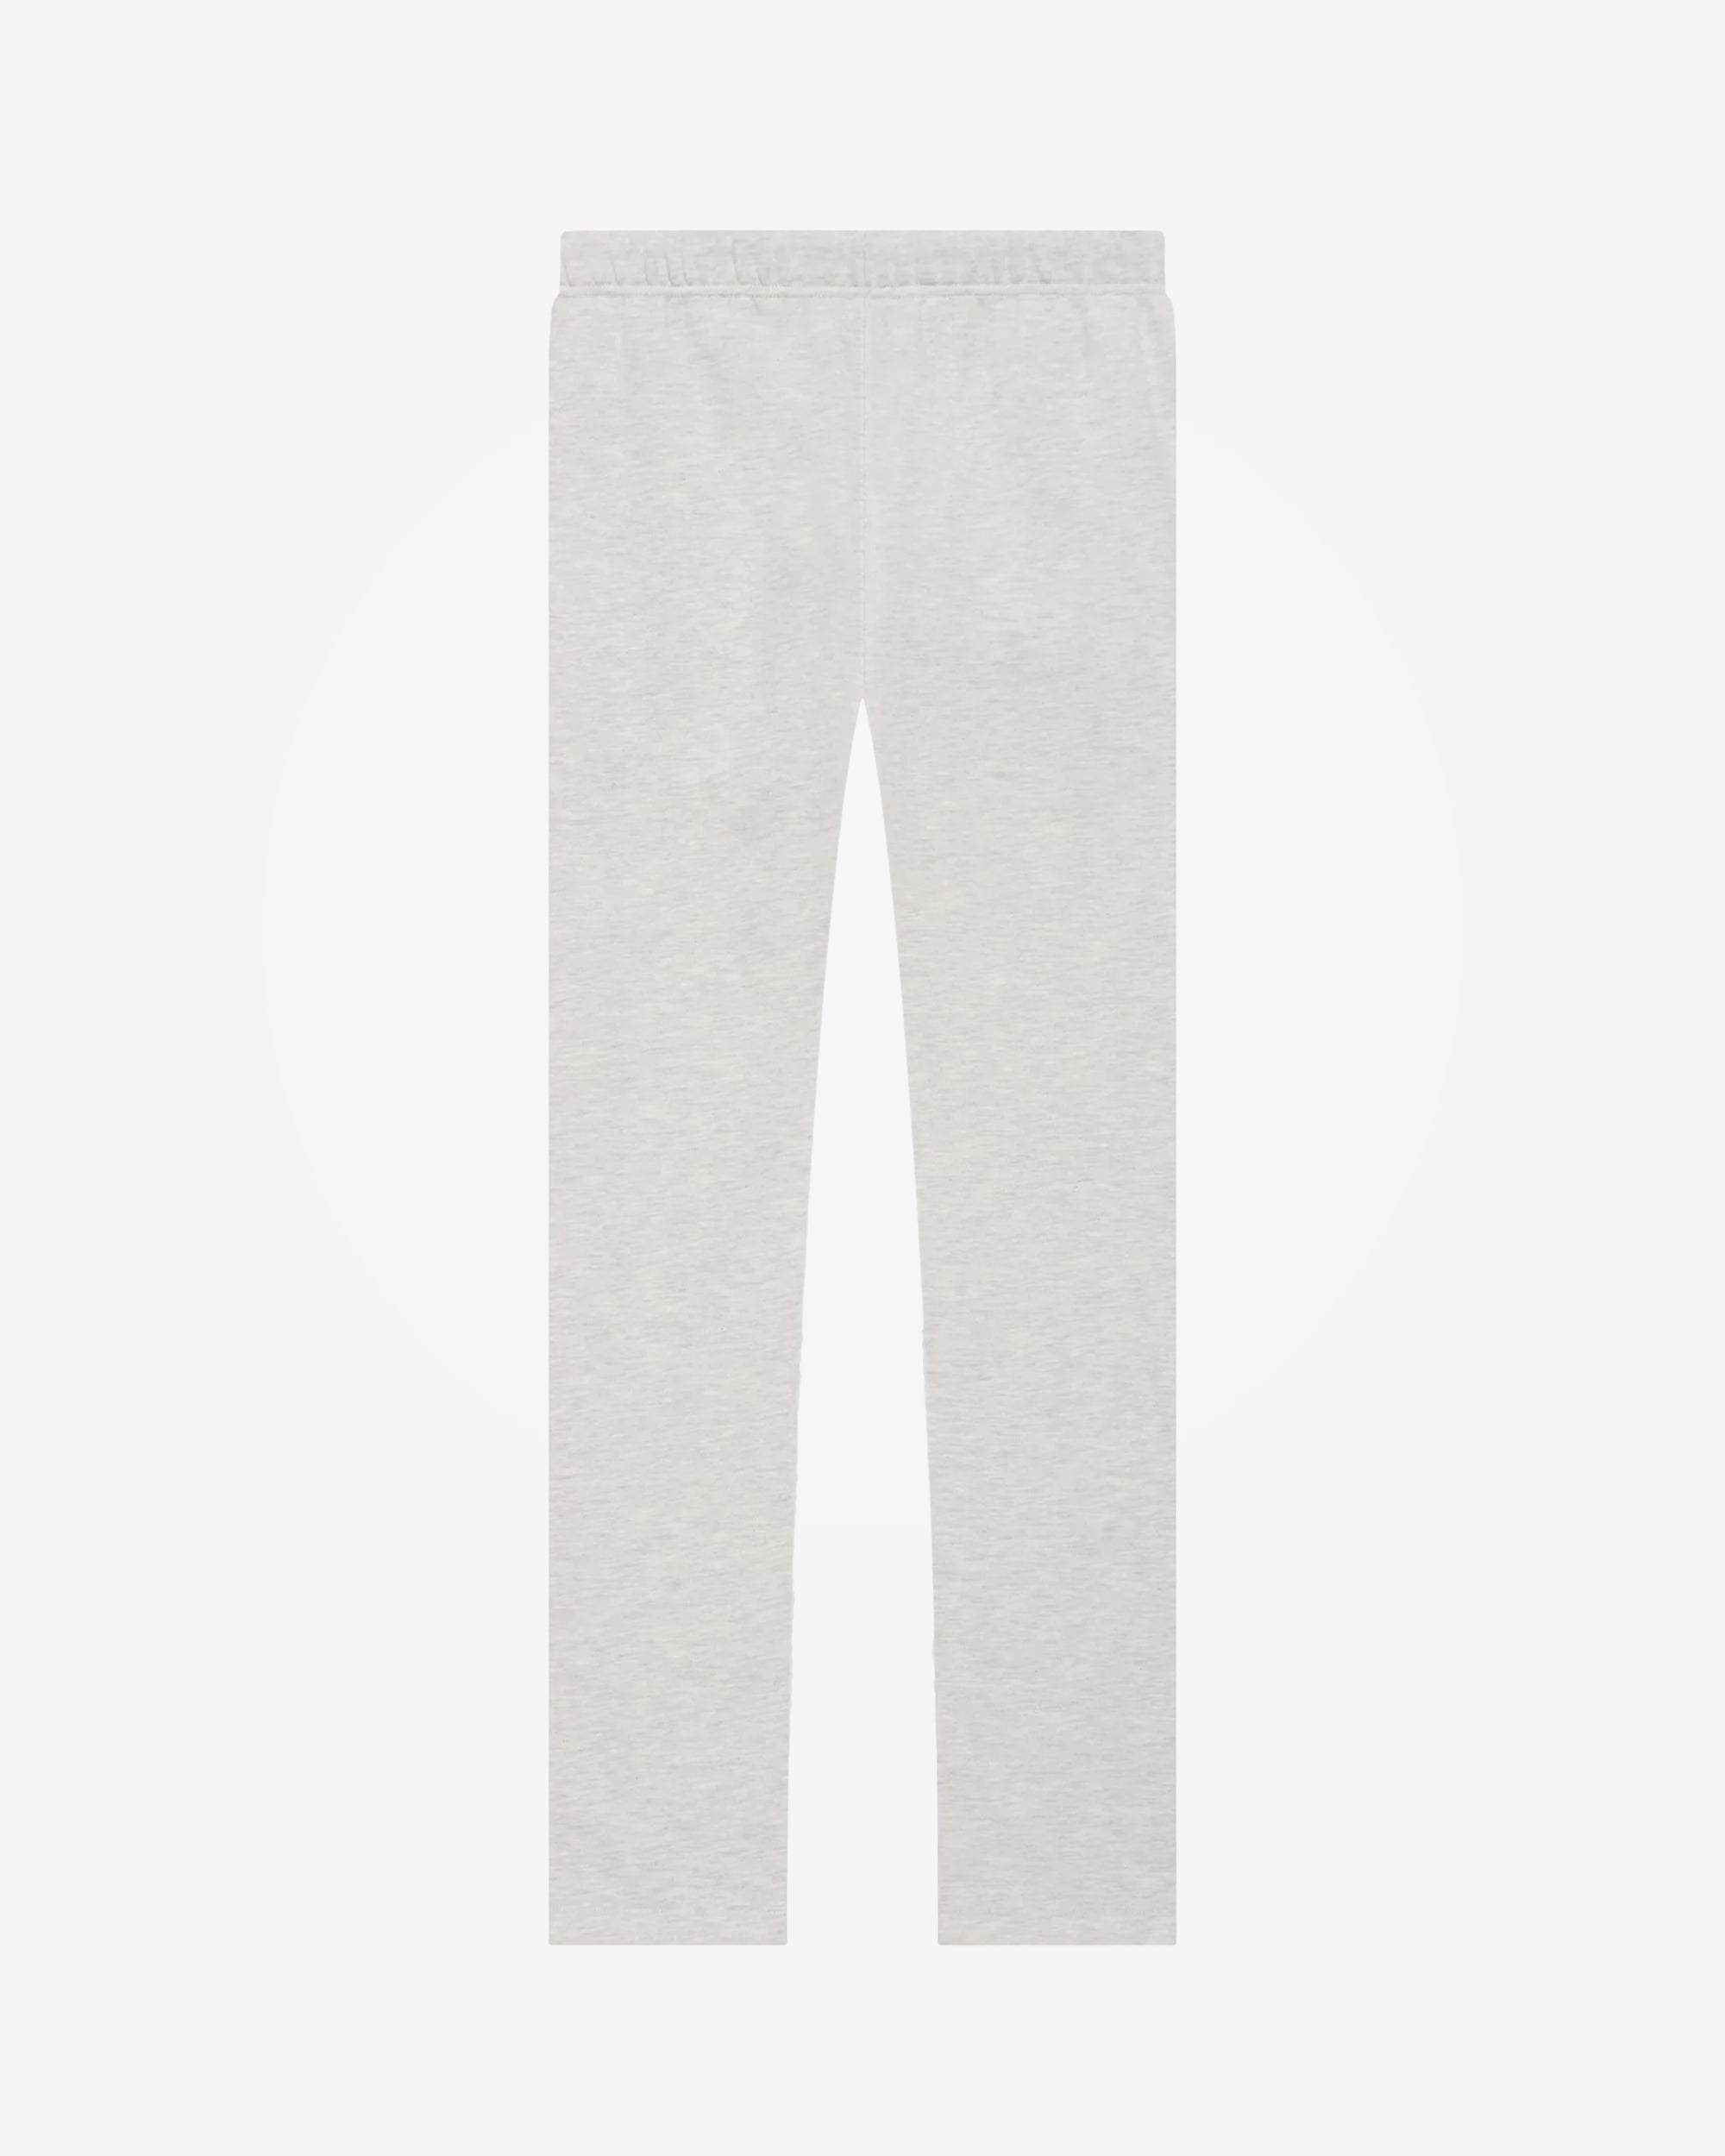 Men's Relaxed Sweatpant in Light Oatmeal